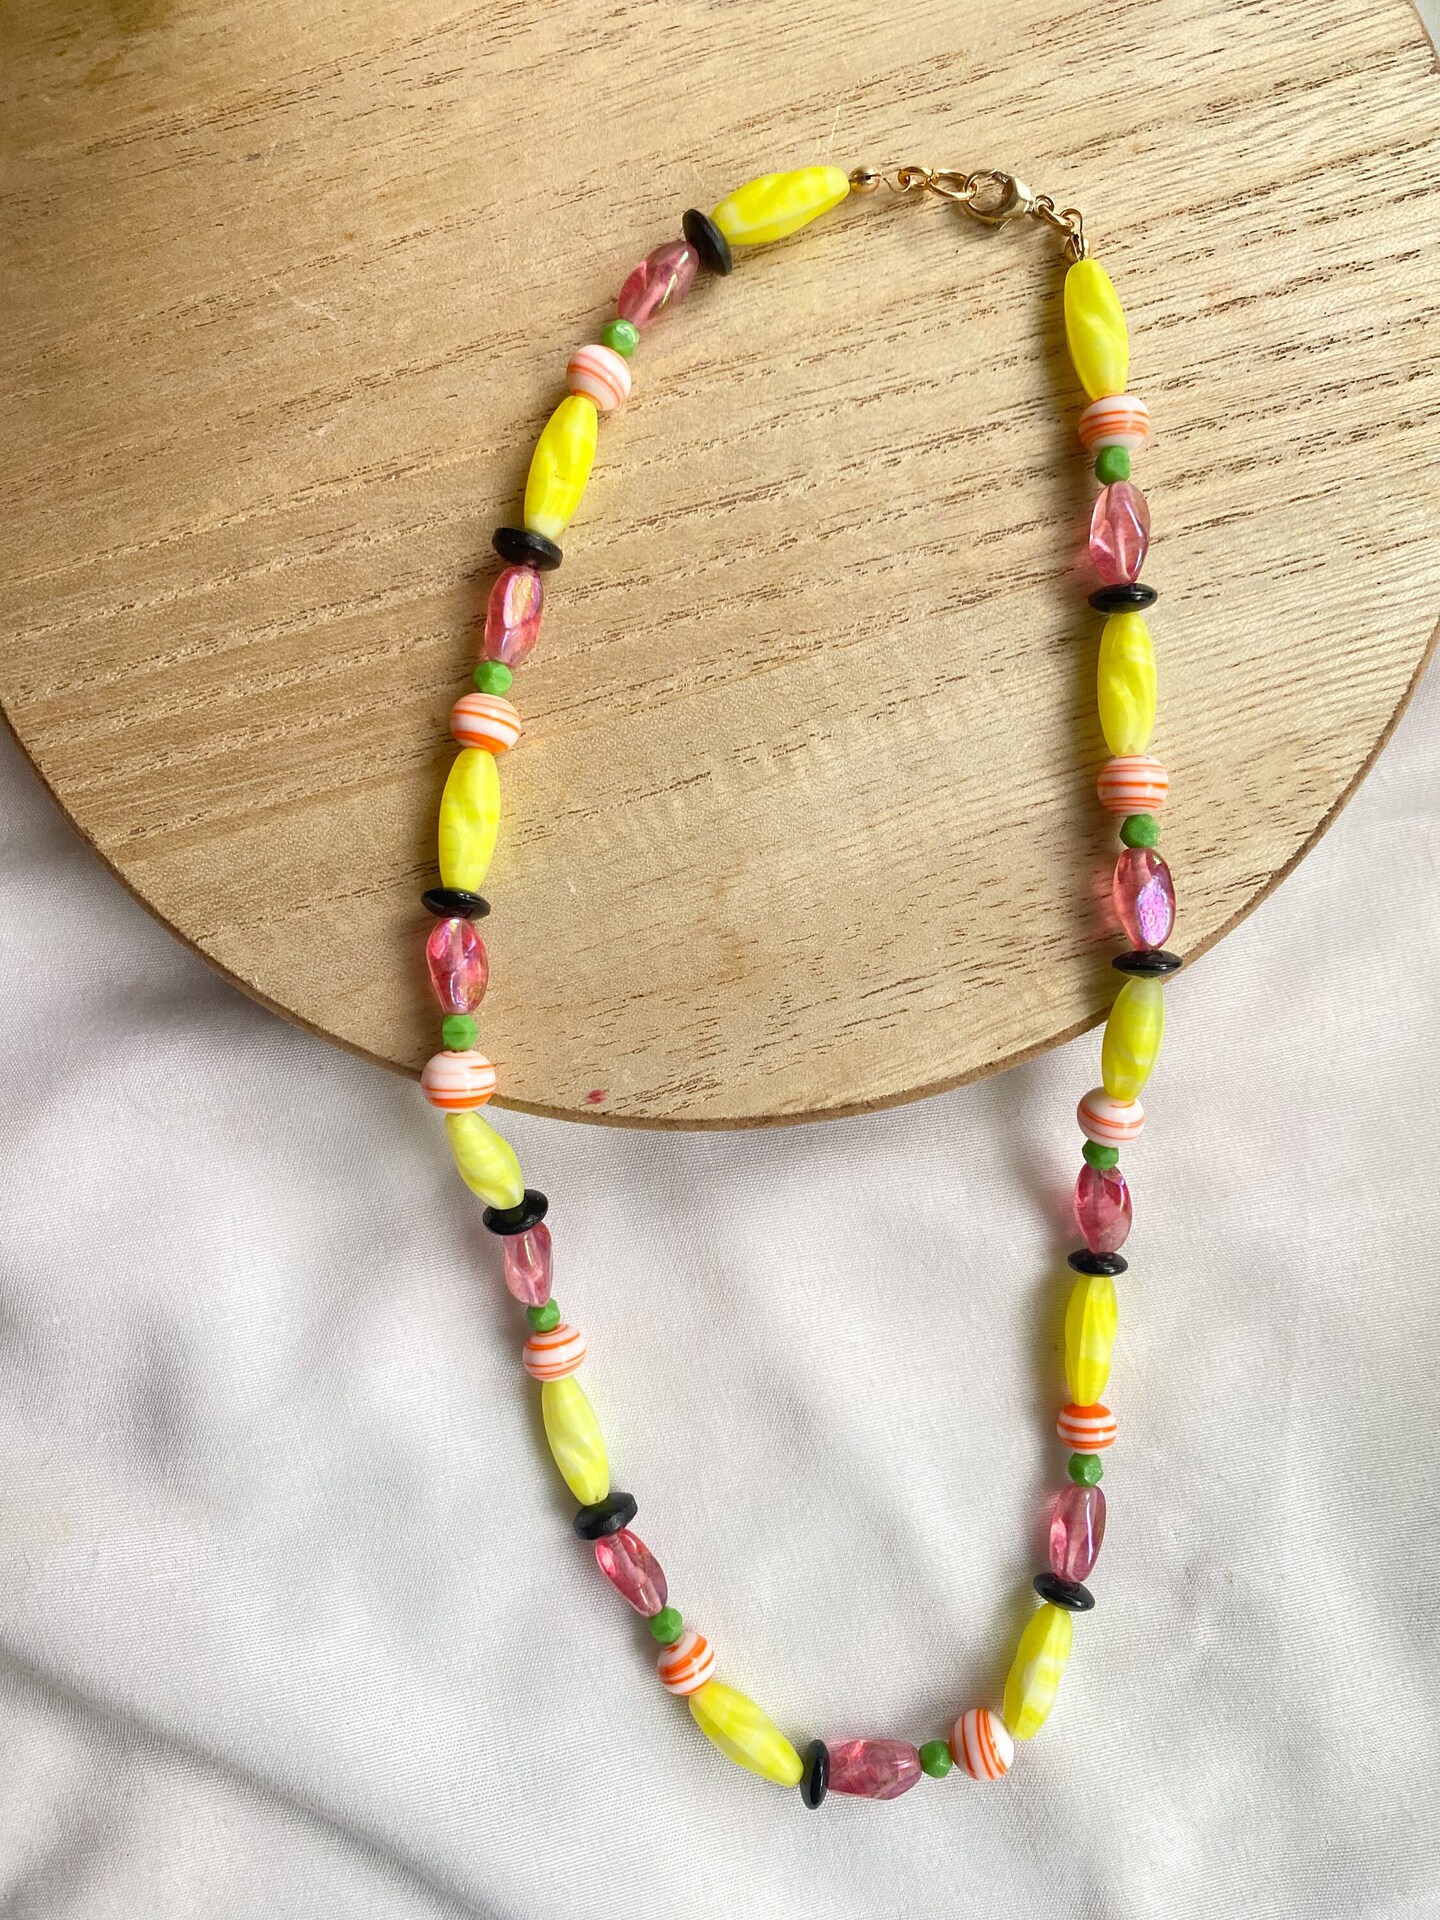 Beaded Necklaces - The Ultimate Guide